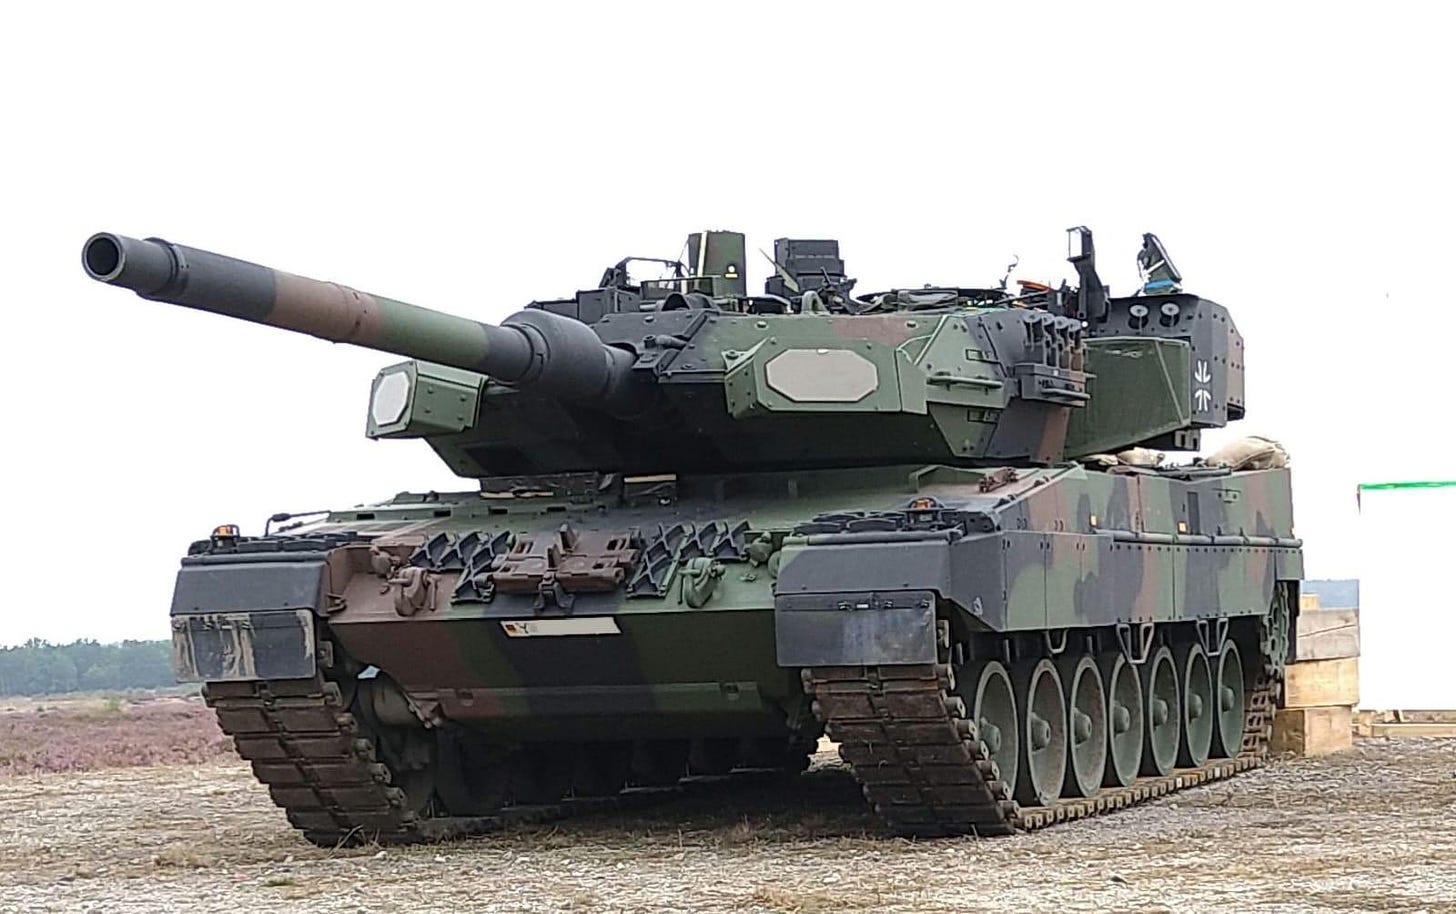 Israel And German MOD Announce Successful Live Fire Test Of Trophy System  On Leopard Tank - MilitaryLeak